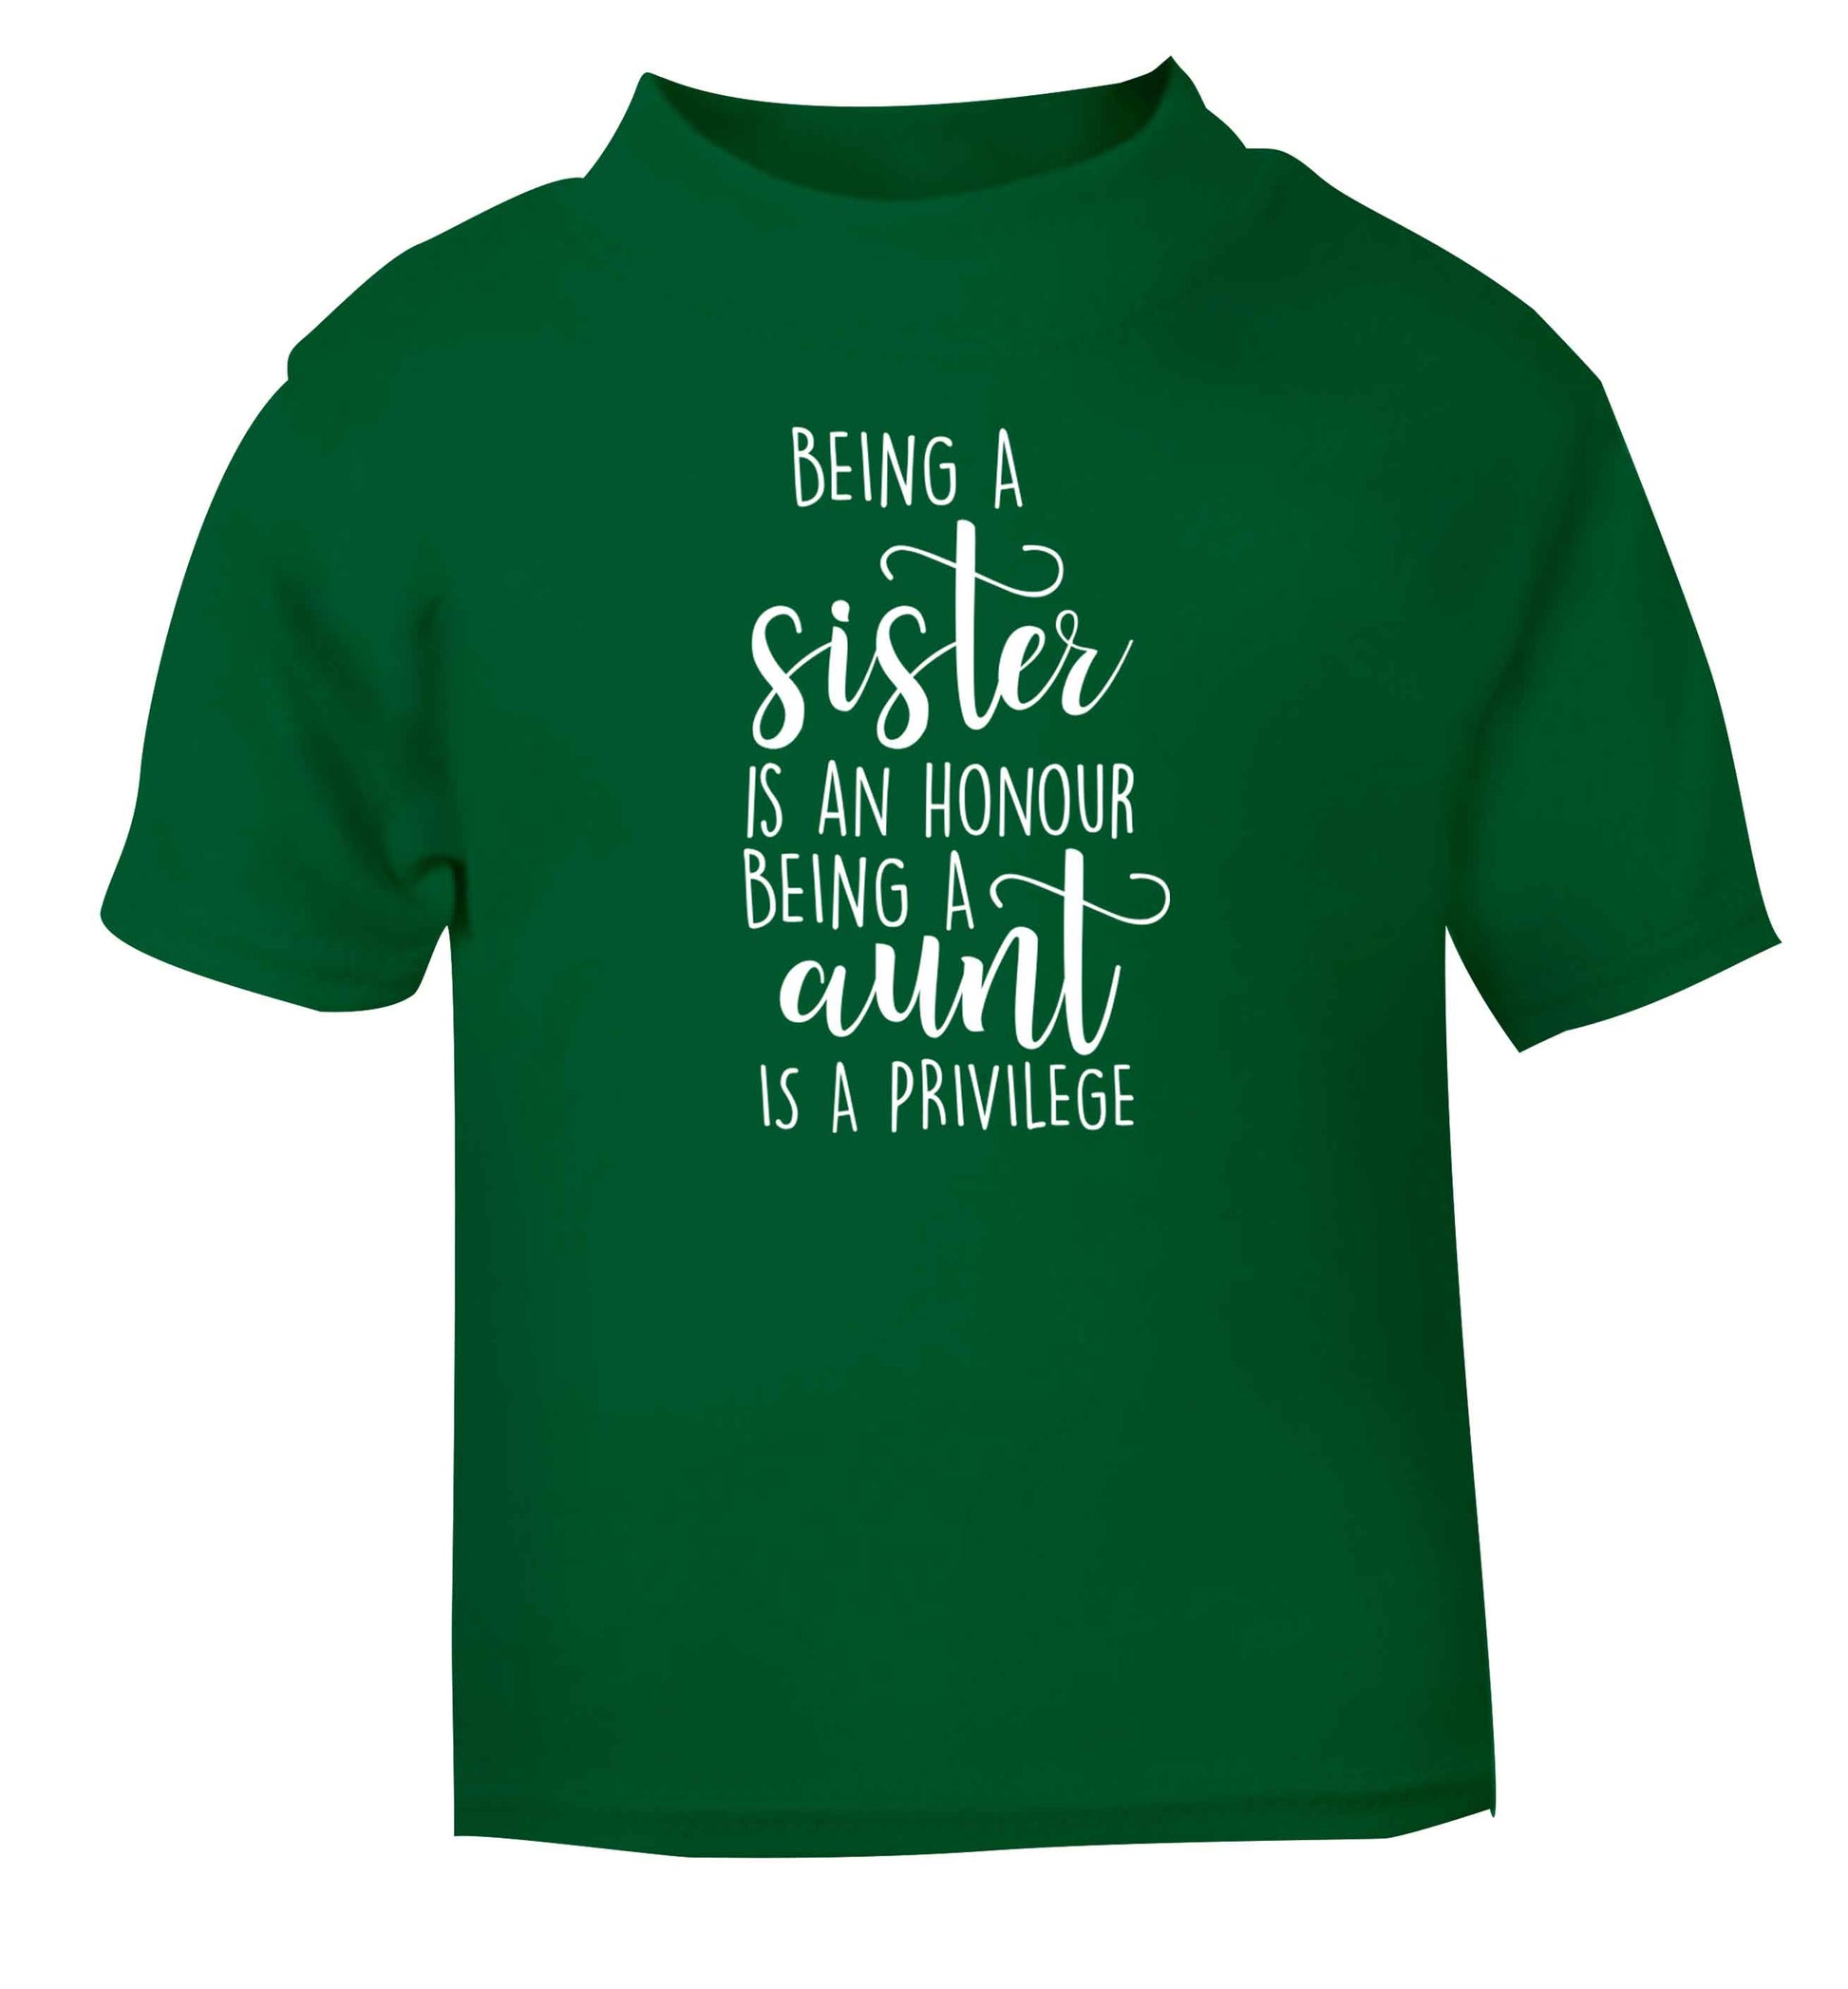 Being a sister is an honour being an auntie is a privilege green Baby Toddler Tshirt 2 Years